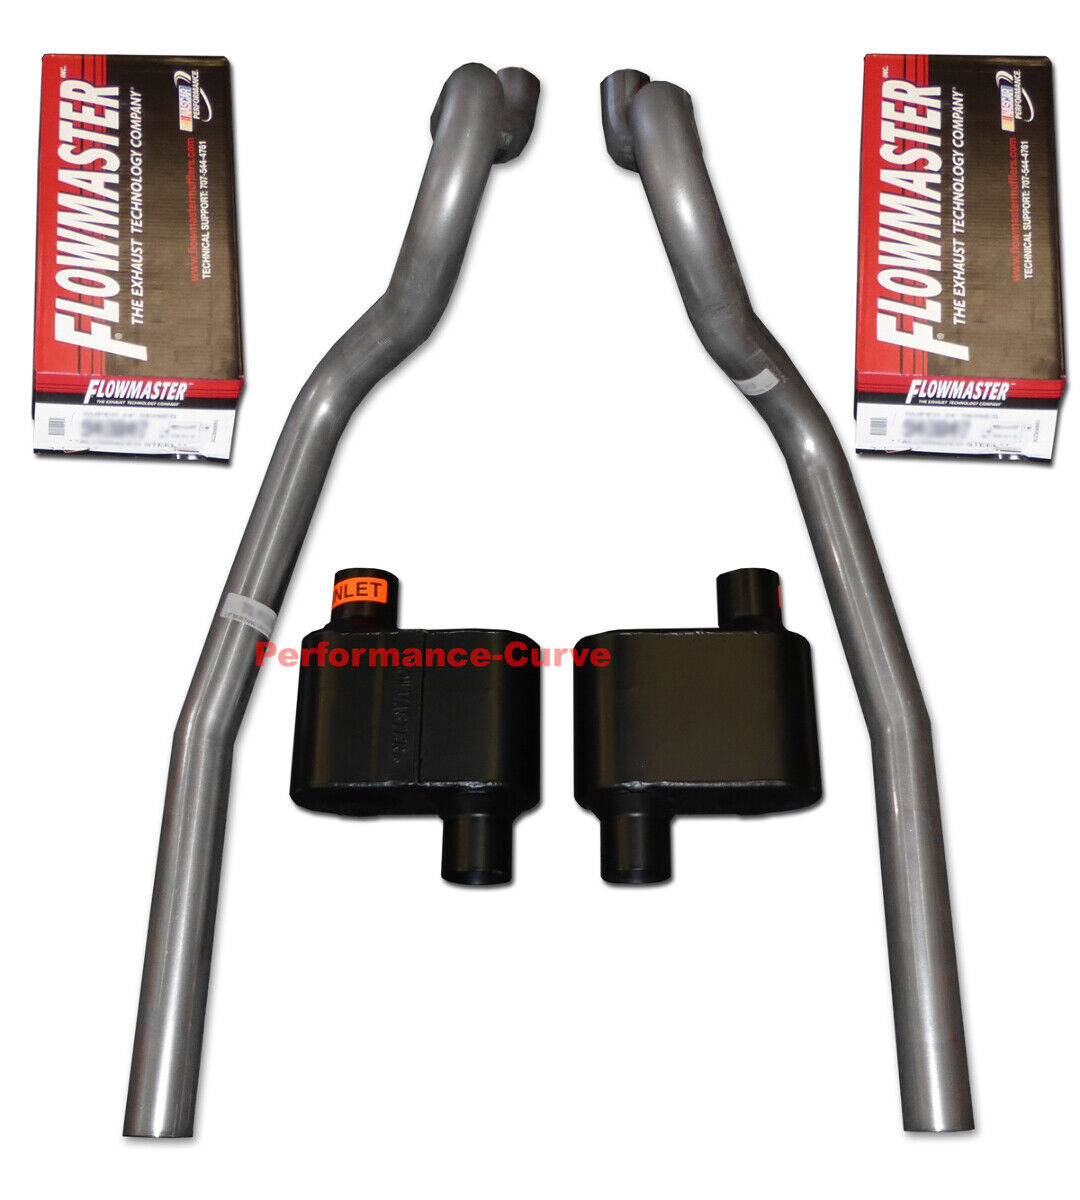 86-04 Ford Mustang GT 4.6 5.0 Exhaust System w/ Flowmaster Super 10 Mufflers